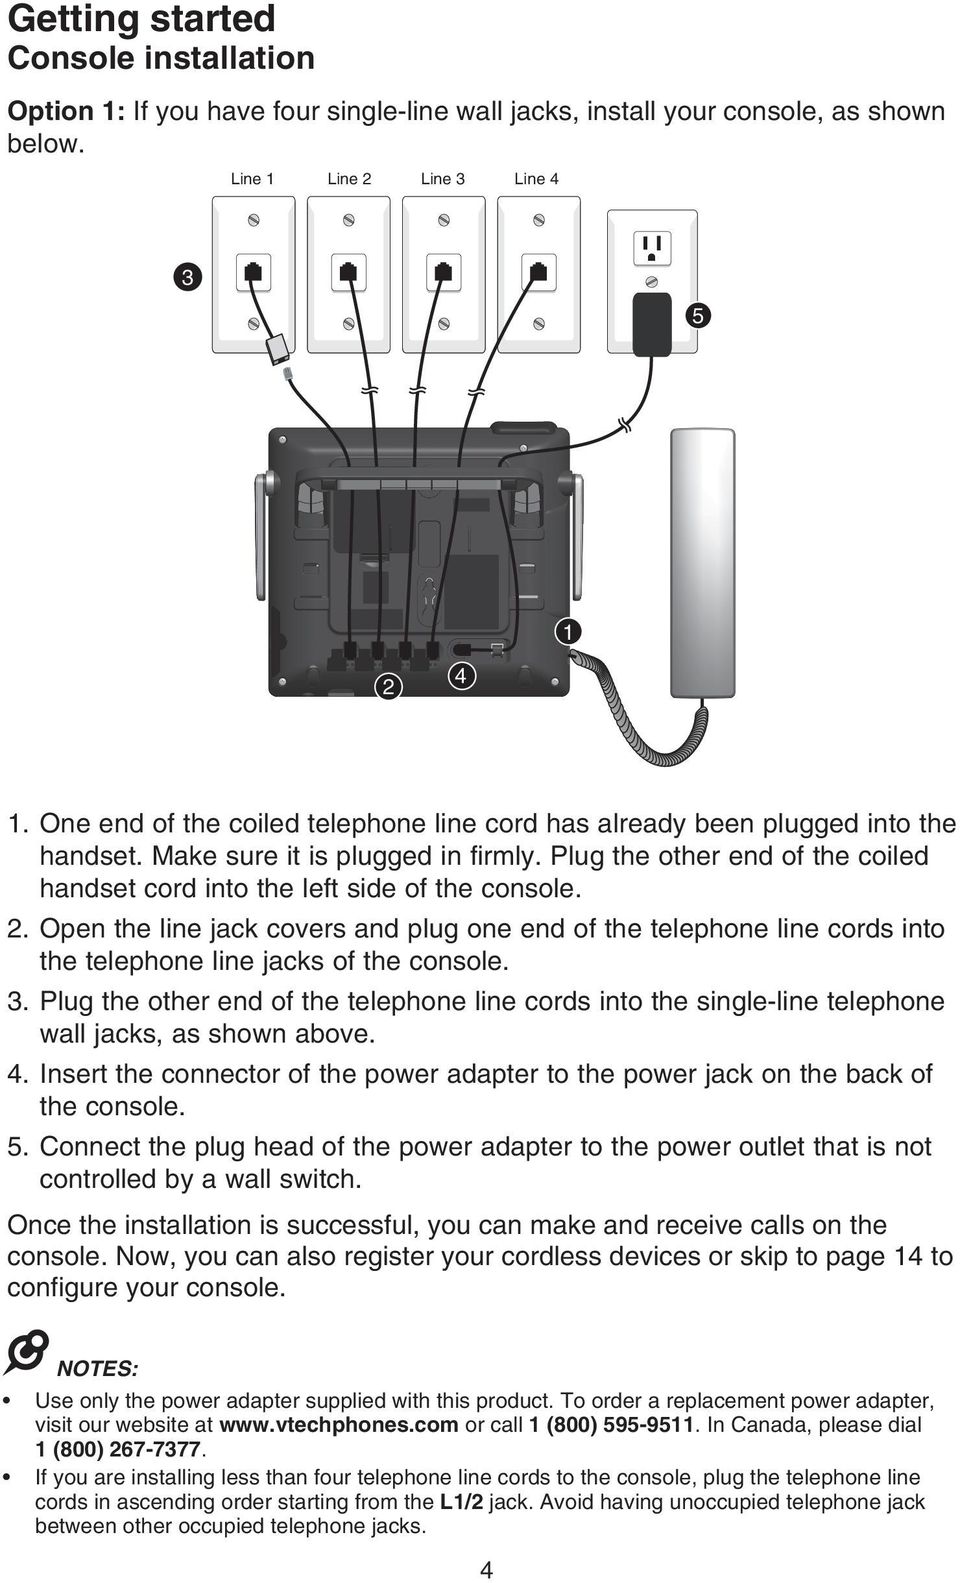 Plug the other end of the coiled handset cord into the left side of the console. Open the line jack covers and plug one end of the telephone line cords into the telephone line jacks of the console.